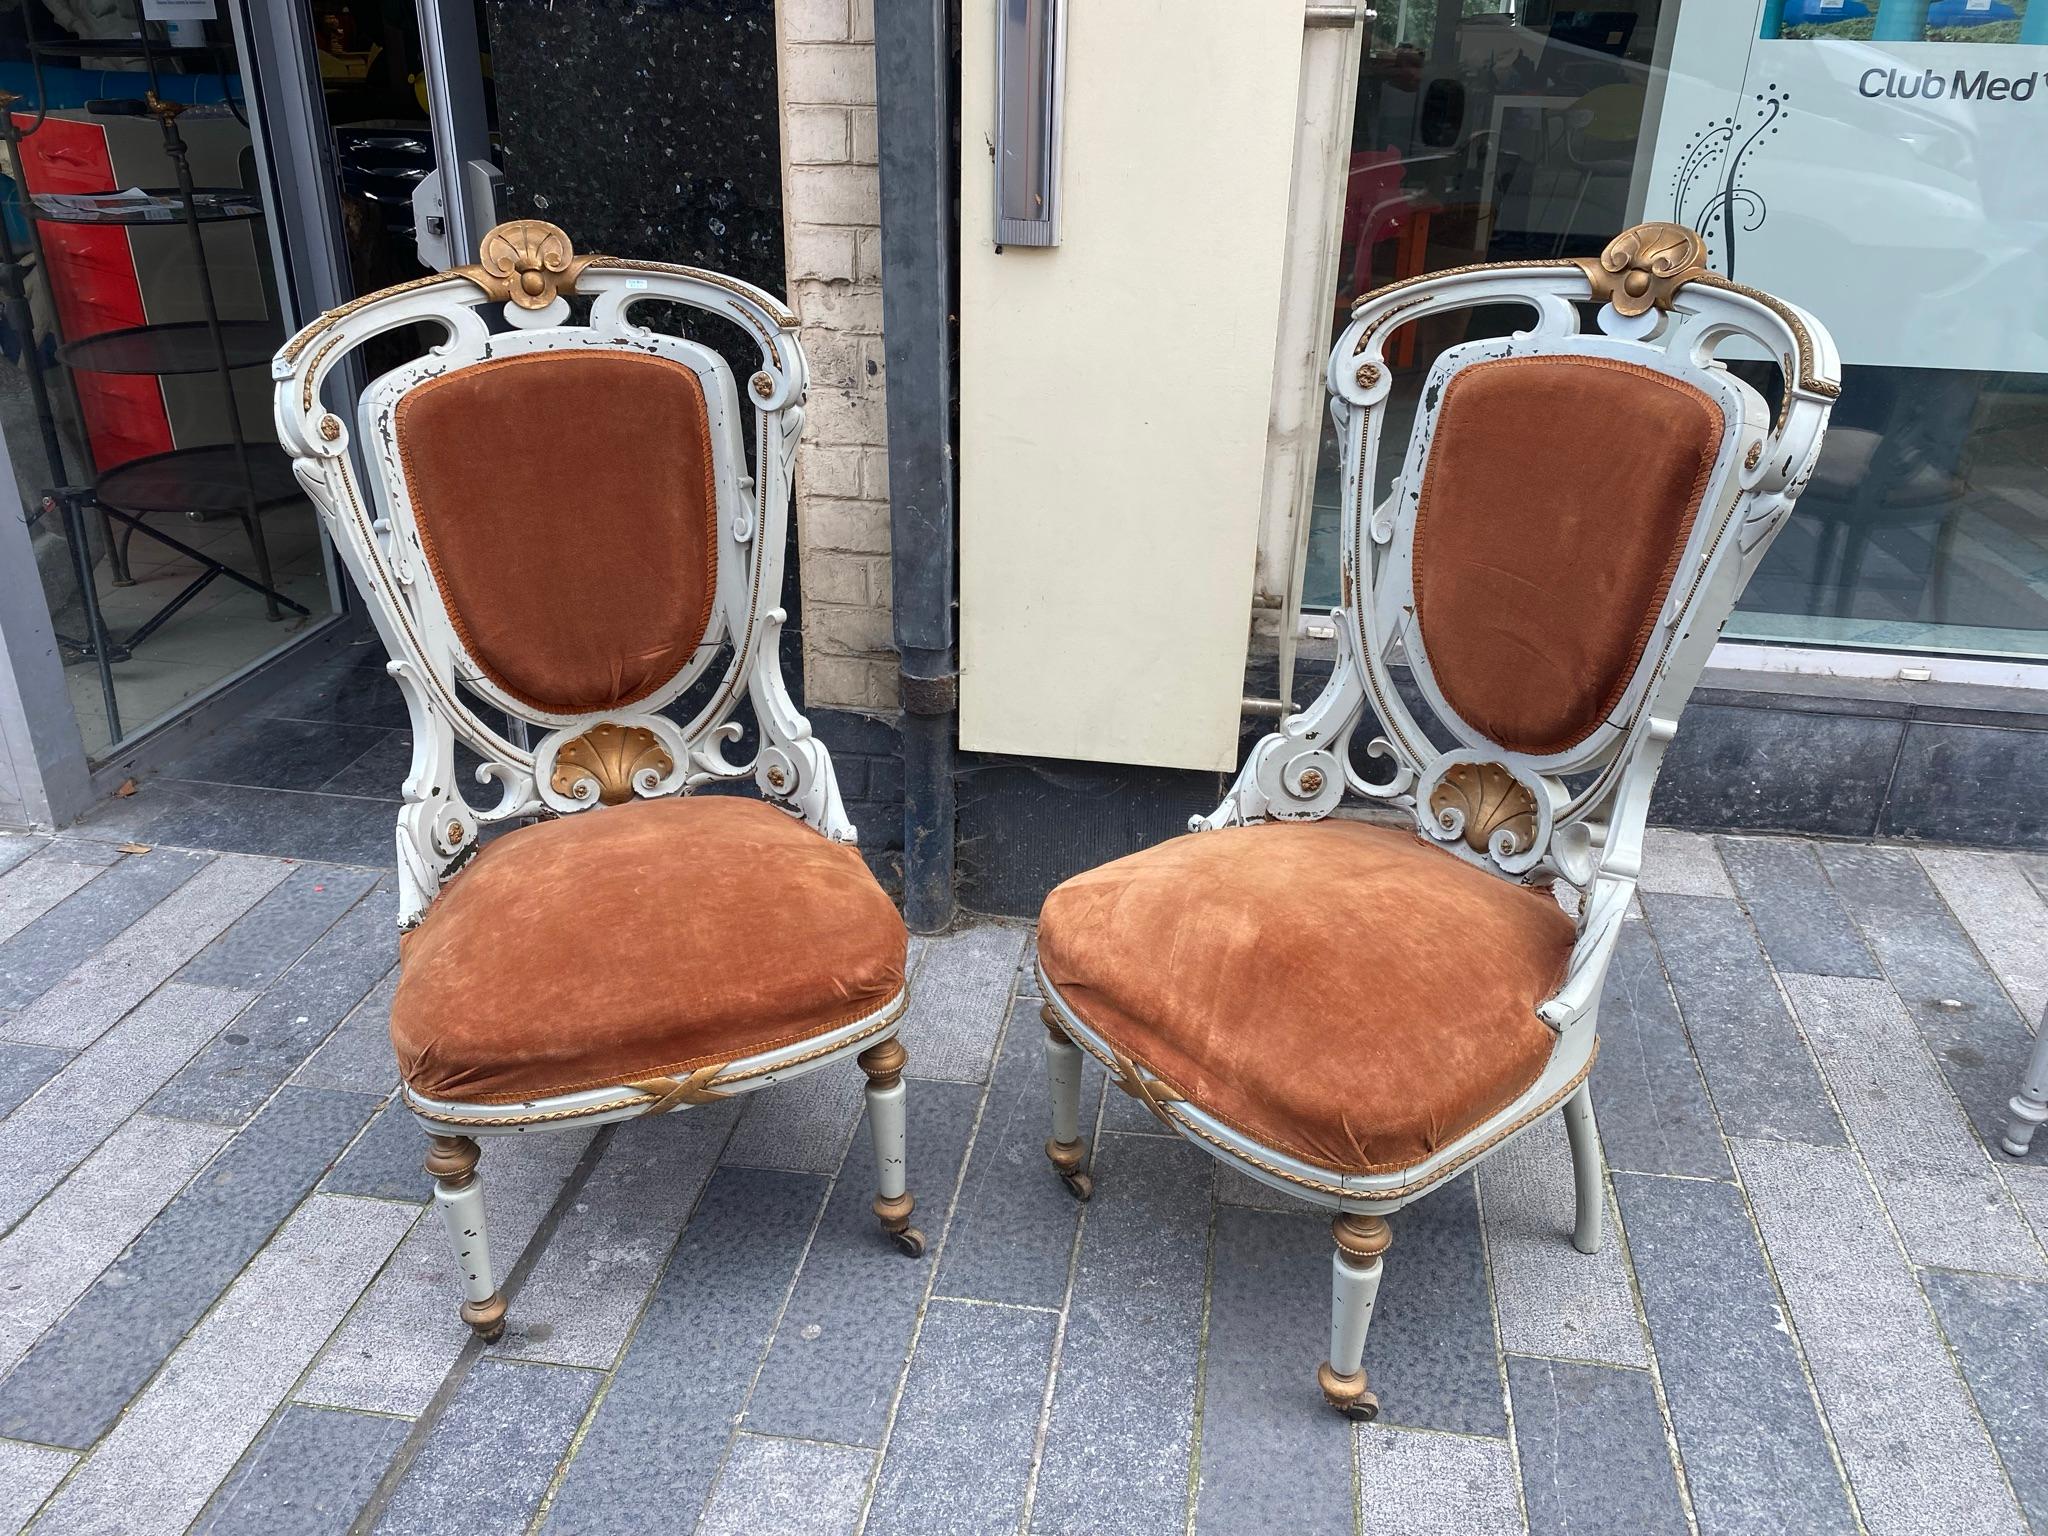 2 Art Nouveau Armchairs, circa 1900
In lacquered wood, gilded wood and bronze 
No breakage but there are some cracks.